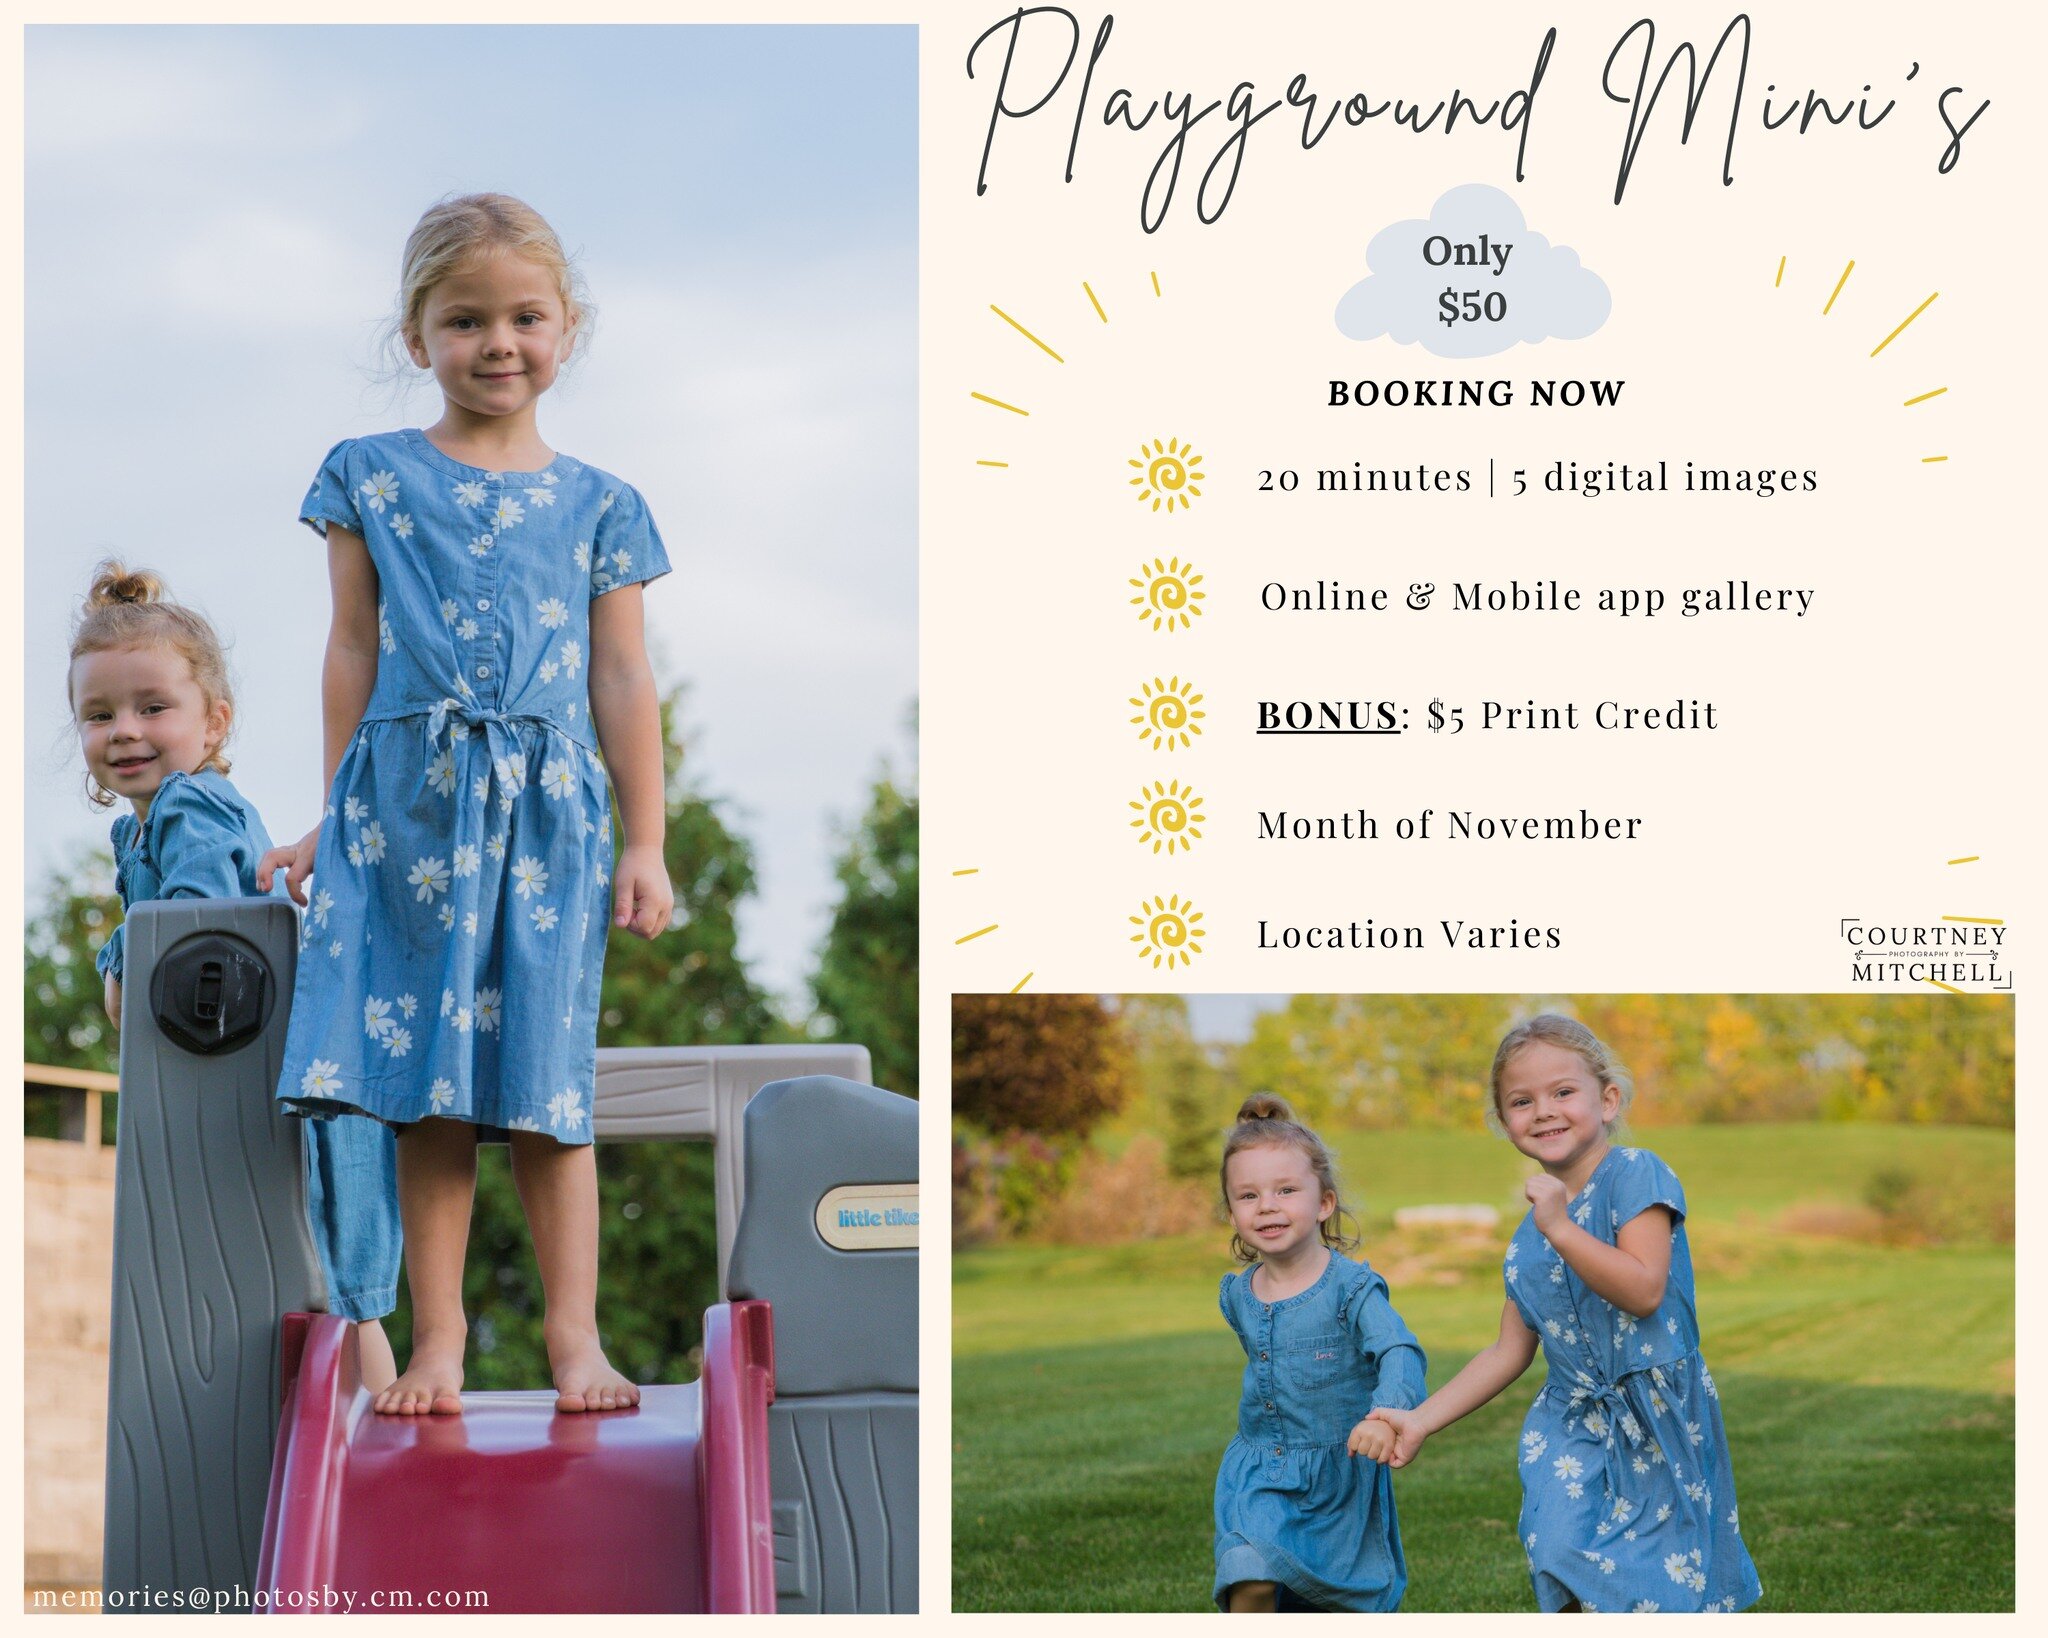 Now Booking!

Last week to book your playground Mini's!

Showcase your kids love of play through photographs that will last for years to come. Capture the smiles and laughter with a personal photo session at any playground of your choice! Included in